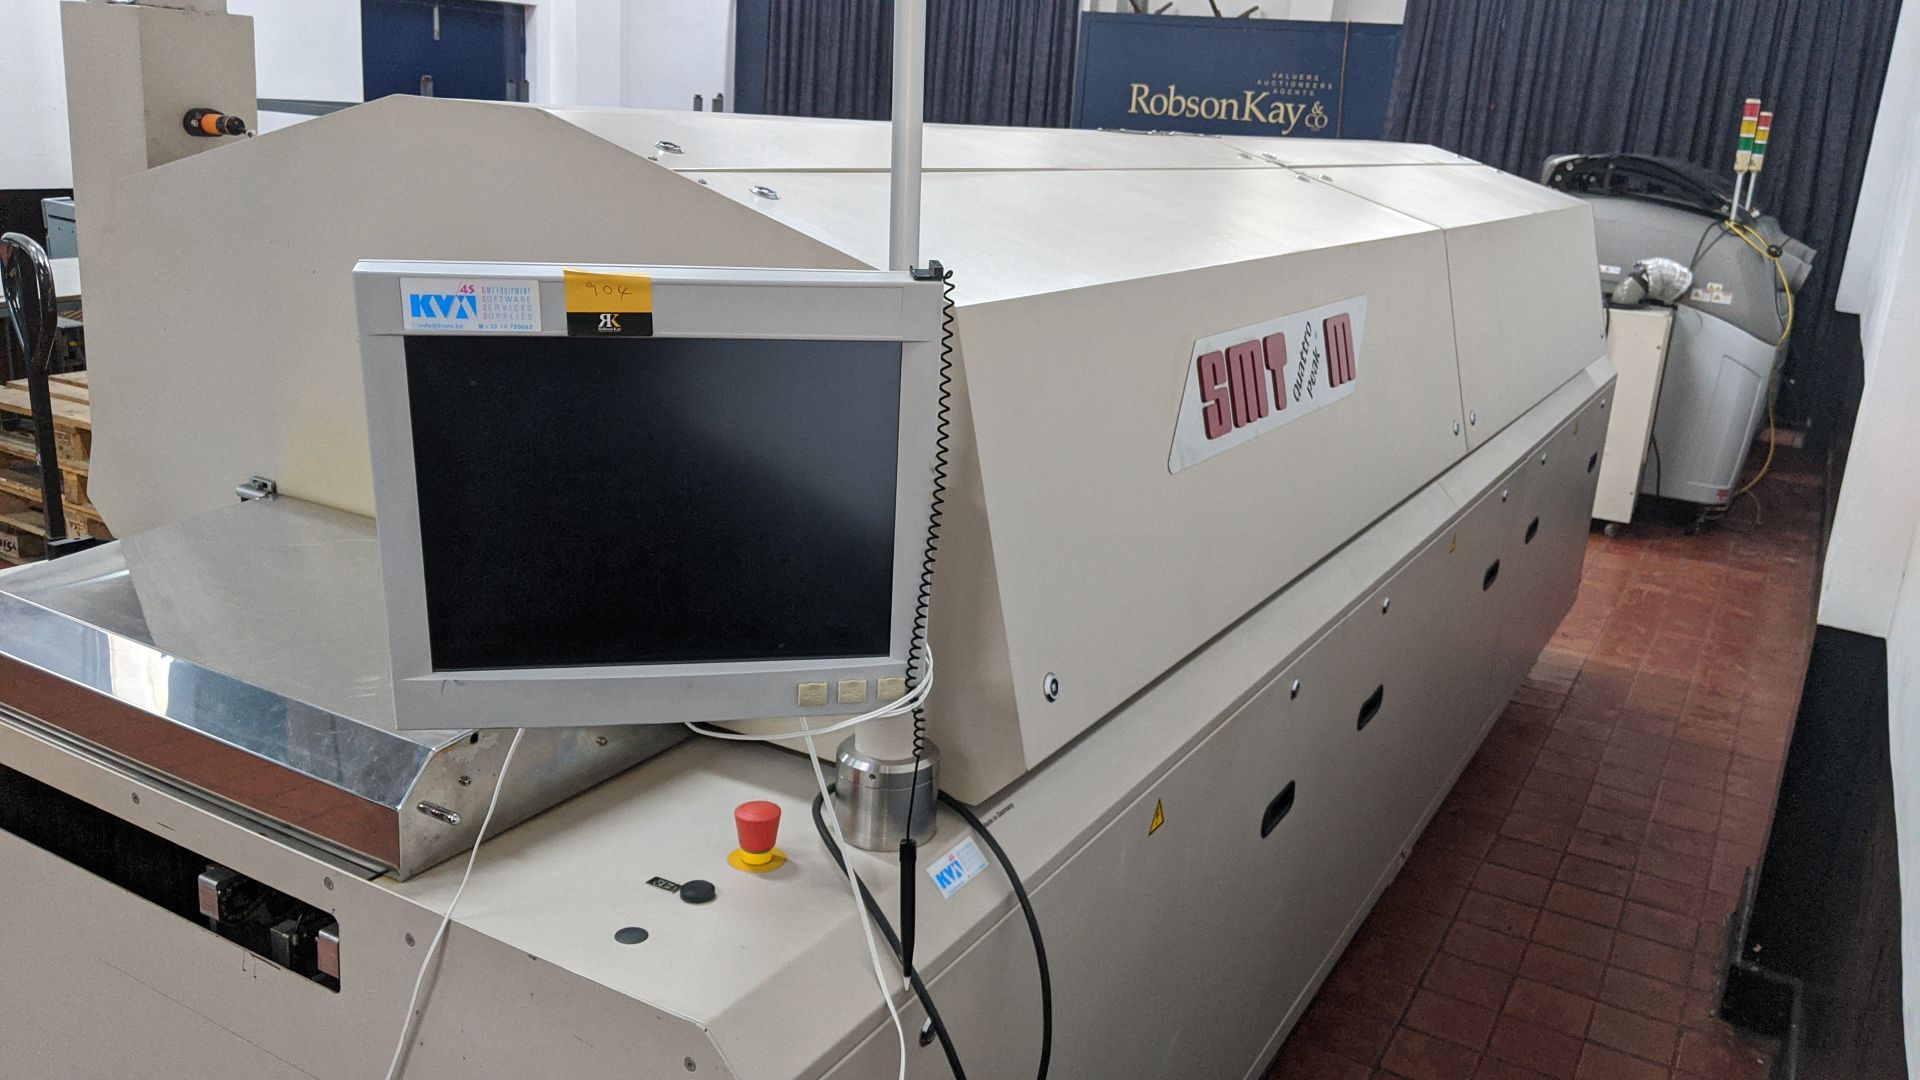 2010 SMT QUATTRO PEAK M N2 REFLOW OVEN for use in Printed Circuit Board Assembly - Image 4 of 21